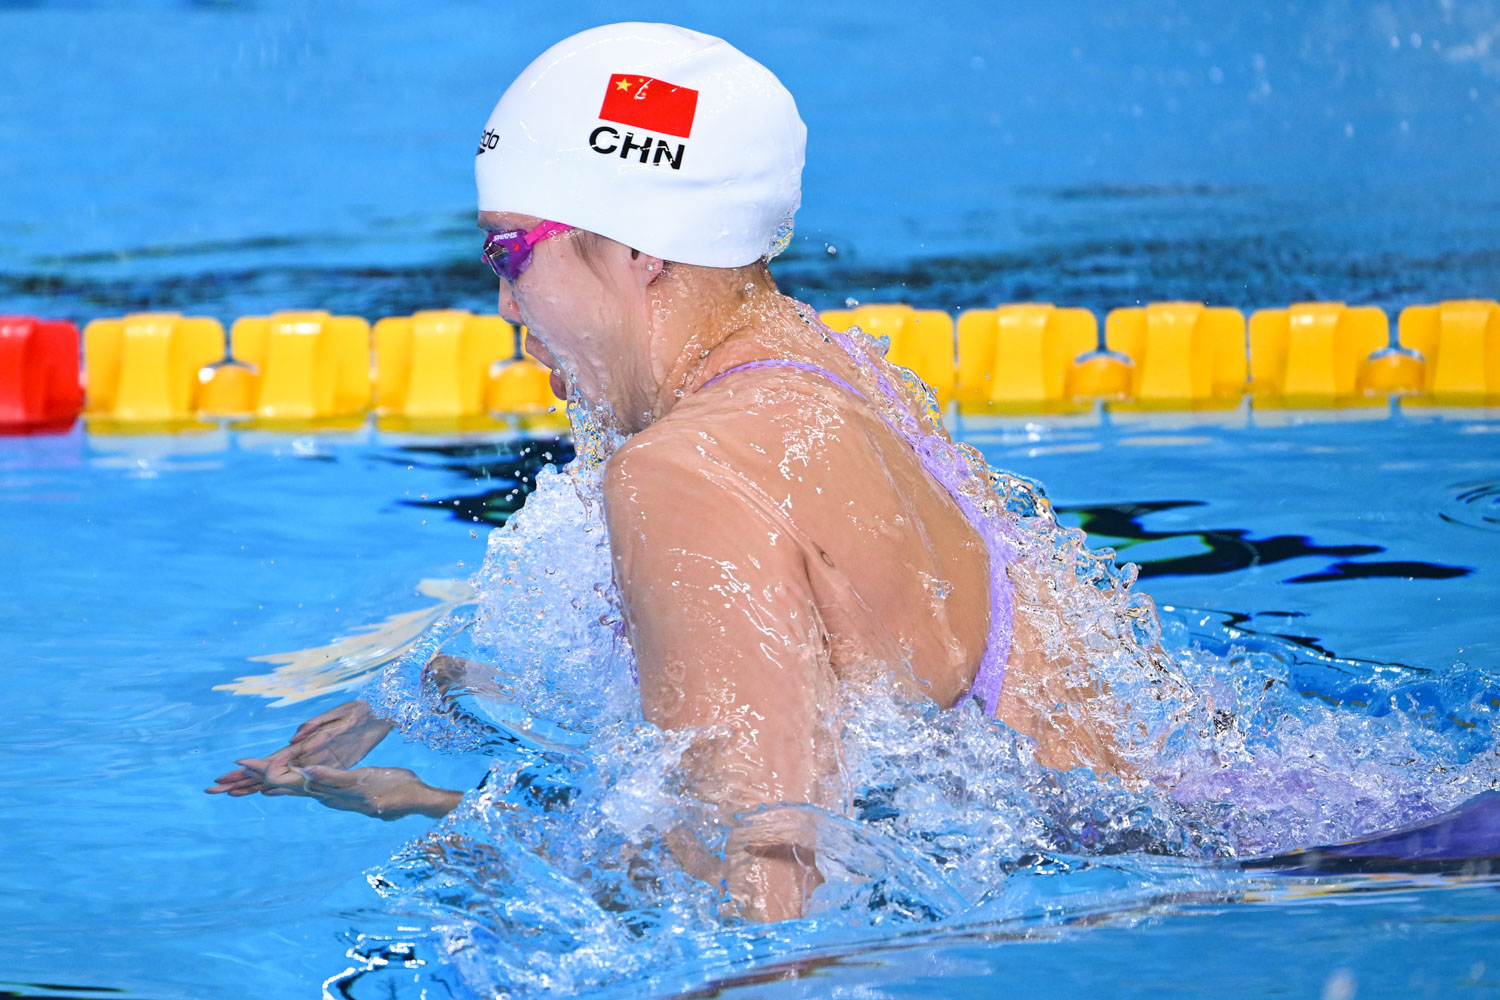 Breaking Barriers: Tang Qianting Sets New Asian Record in Women’s 100m Breaststroke at Chinese National Swimming Championships